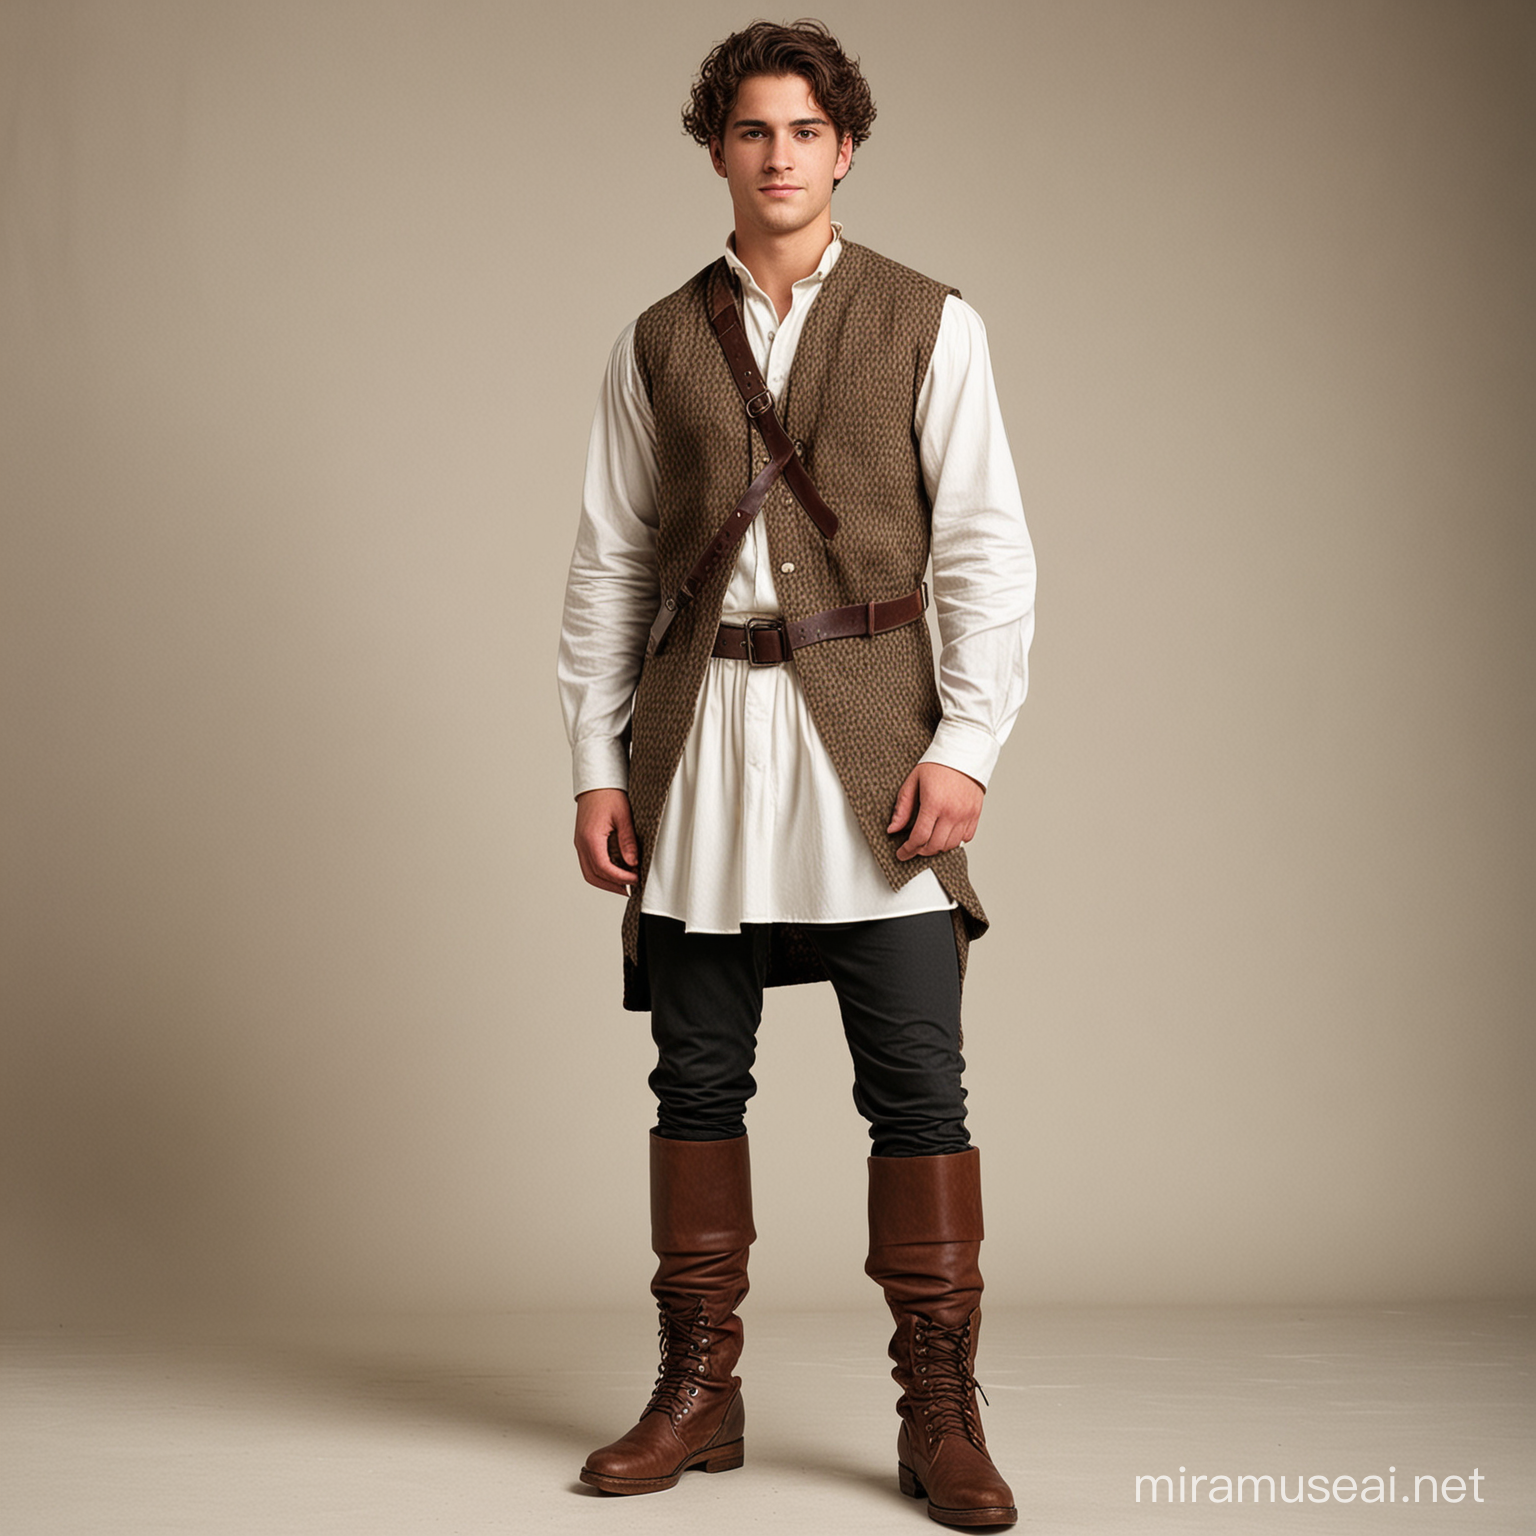 a young man wearing 
Tunic, vest, pants and boots